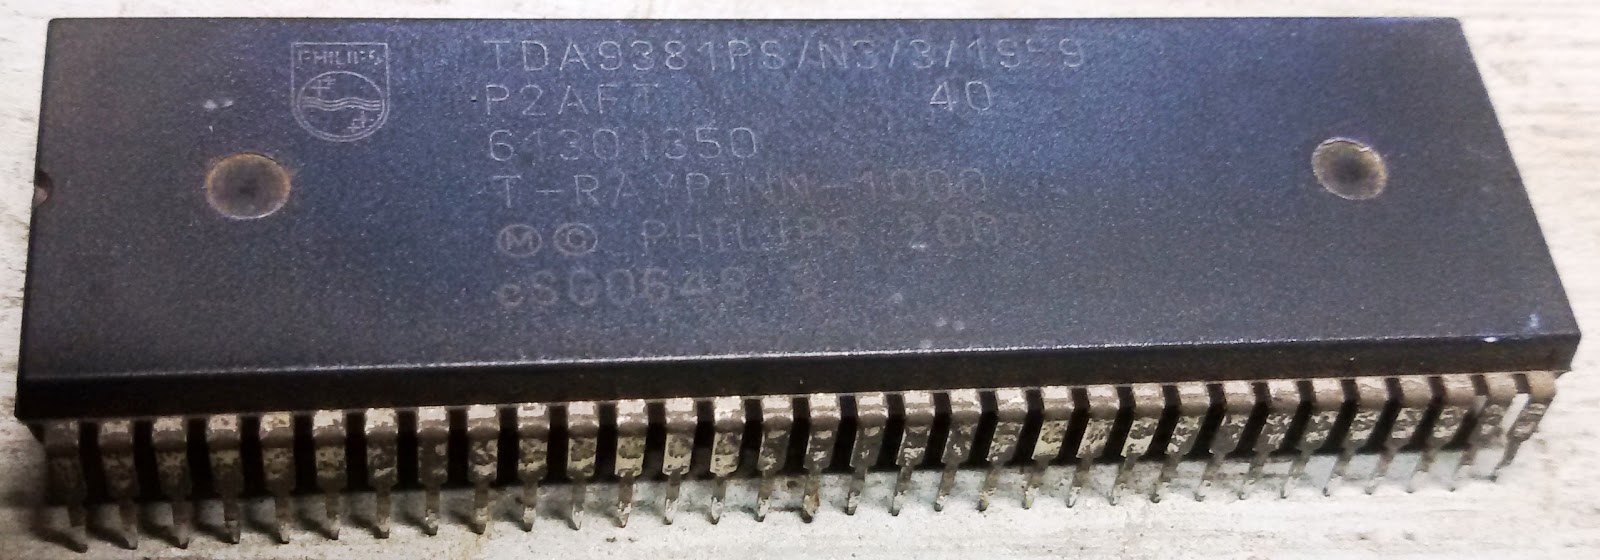 TDA9381PS/N3/3/1959 COLOR TV CHROMA IC DATA SHEET AND ...